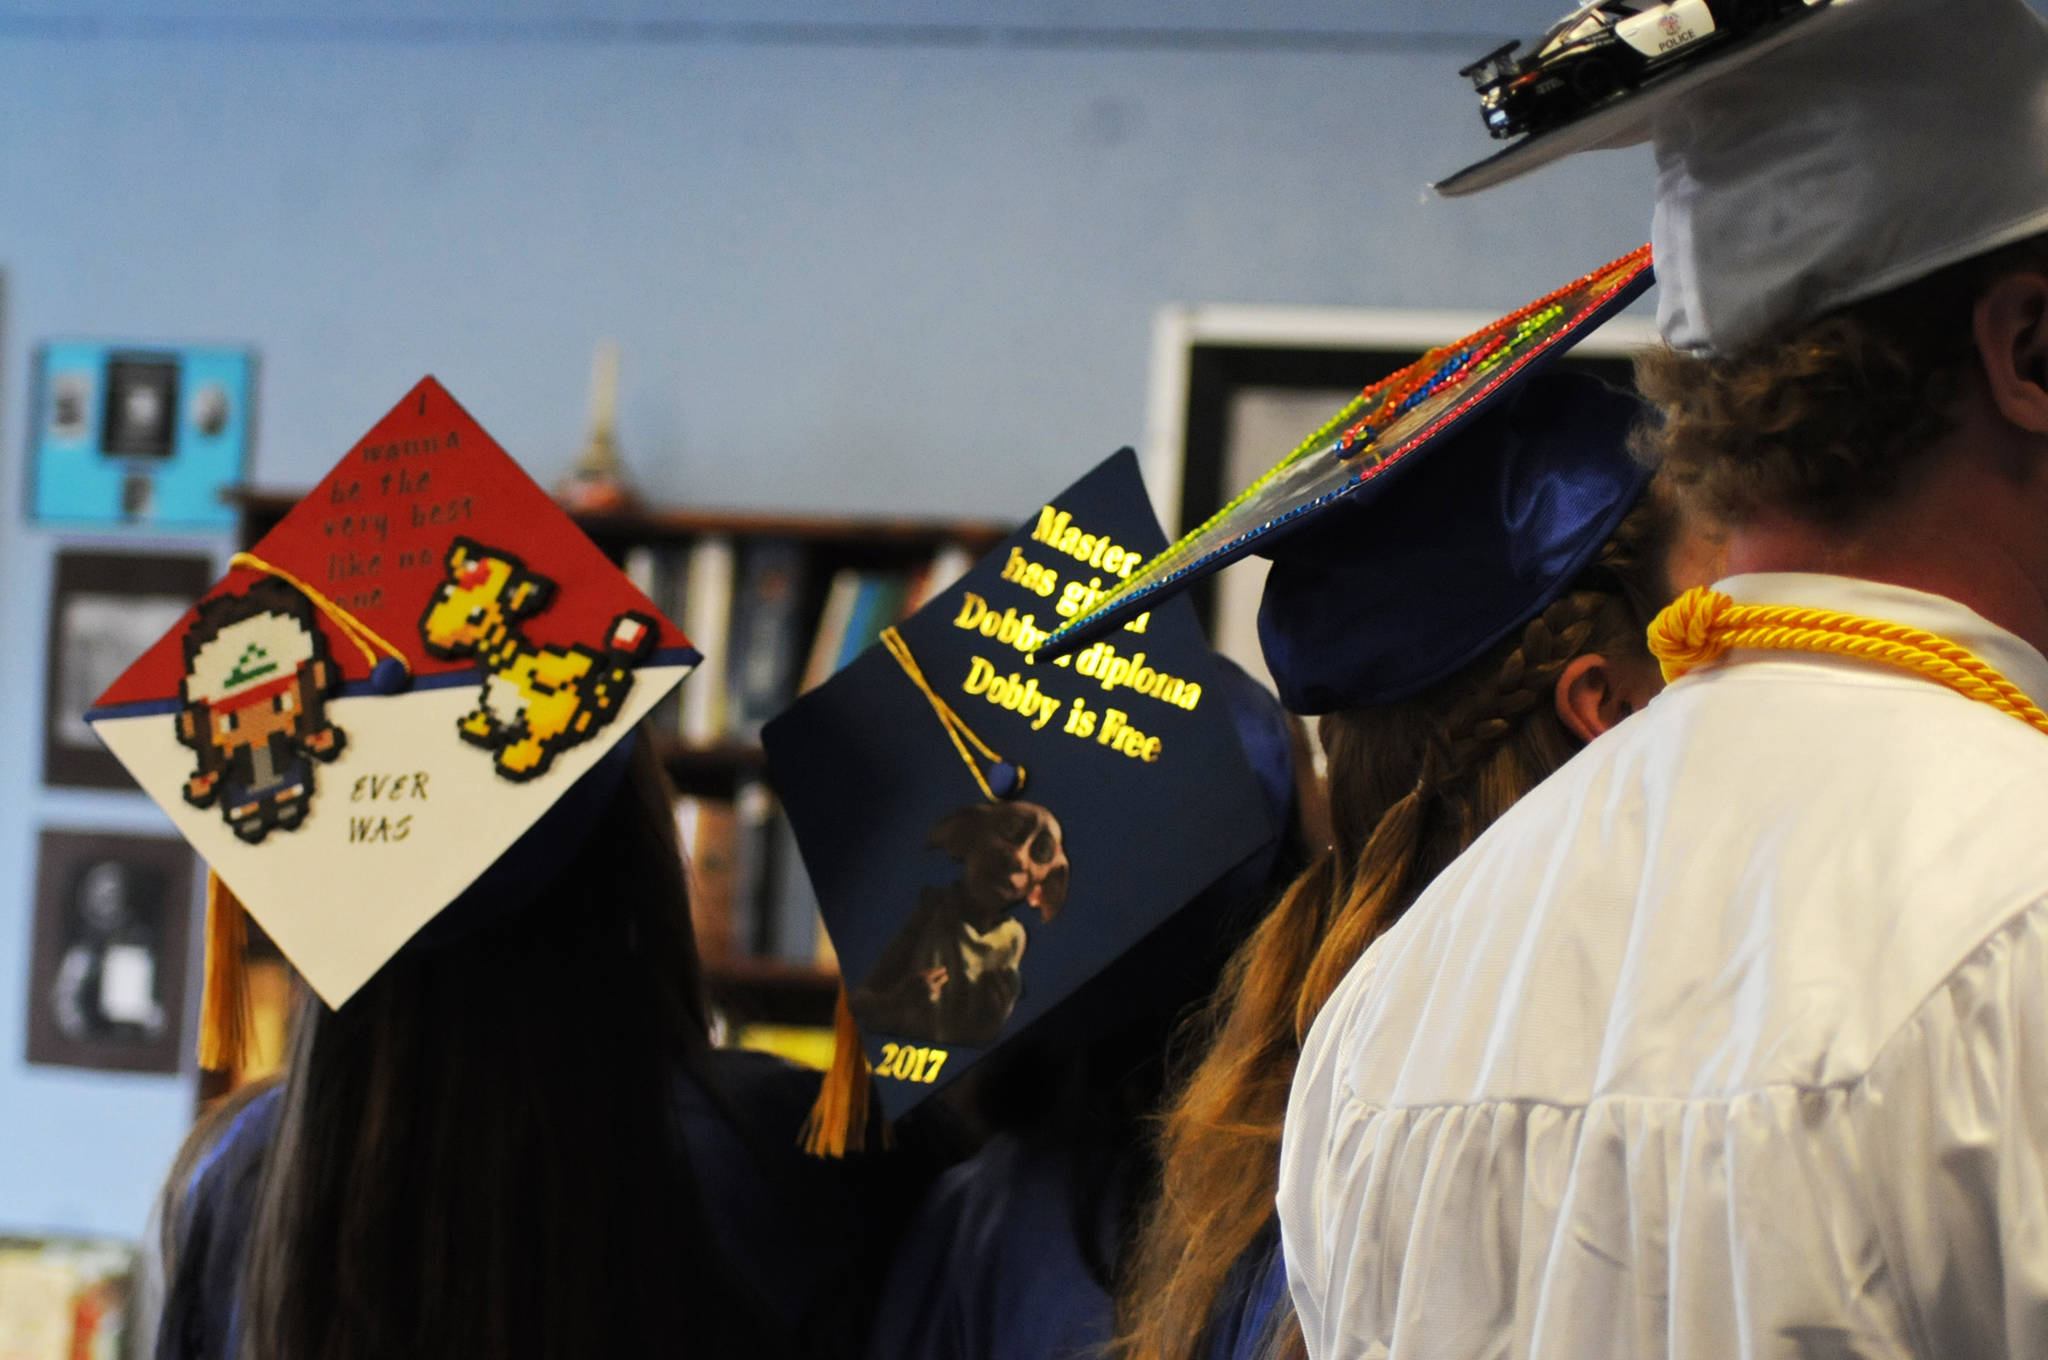 Four of the seven Cook Inlet Academy graduates of 2017 display the creative decorations on their caps before the school’s graduation ceremony Sunday, May 7, 2017 in Soldotna, Alaska. (Elizabeth Earl/Peninsula Clarion)  Four of the seven Cook Inlet Academy graduates of 2017 display the creative decorations on their caps before the school’s graduation ceremony Sunday in Soldotna. (Elizabeth Earl/Peninsula Clarion)